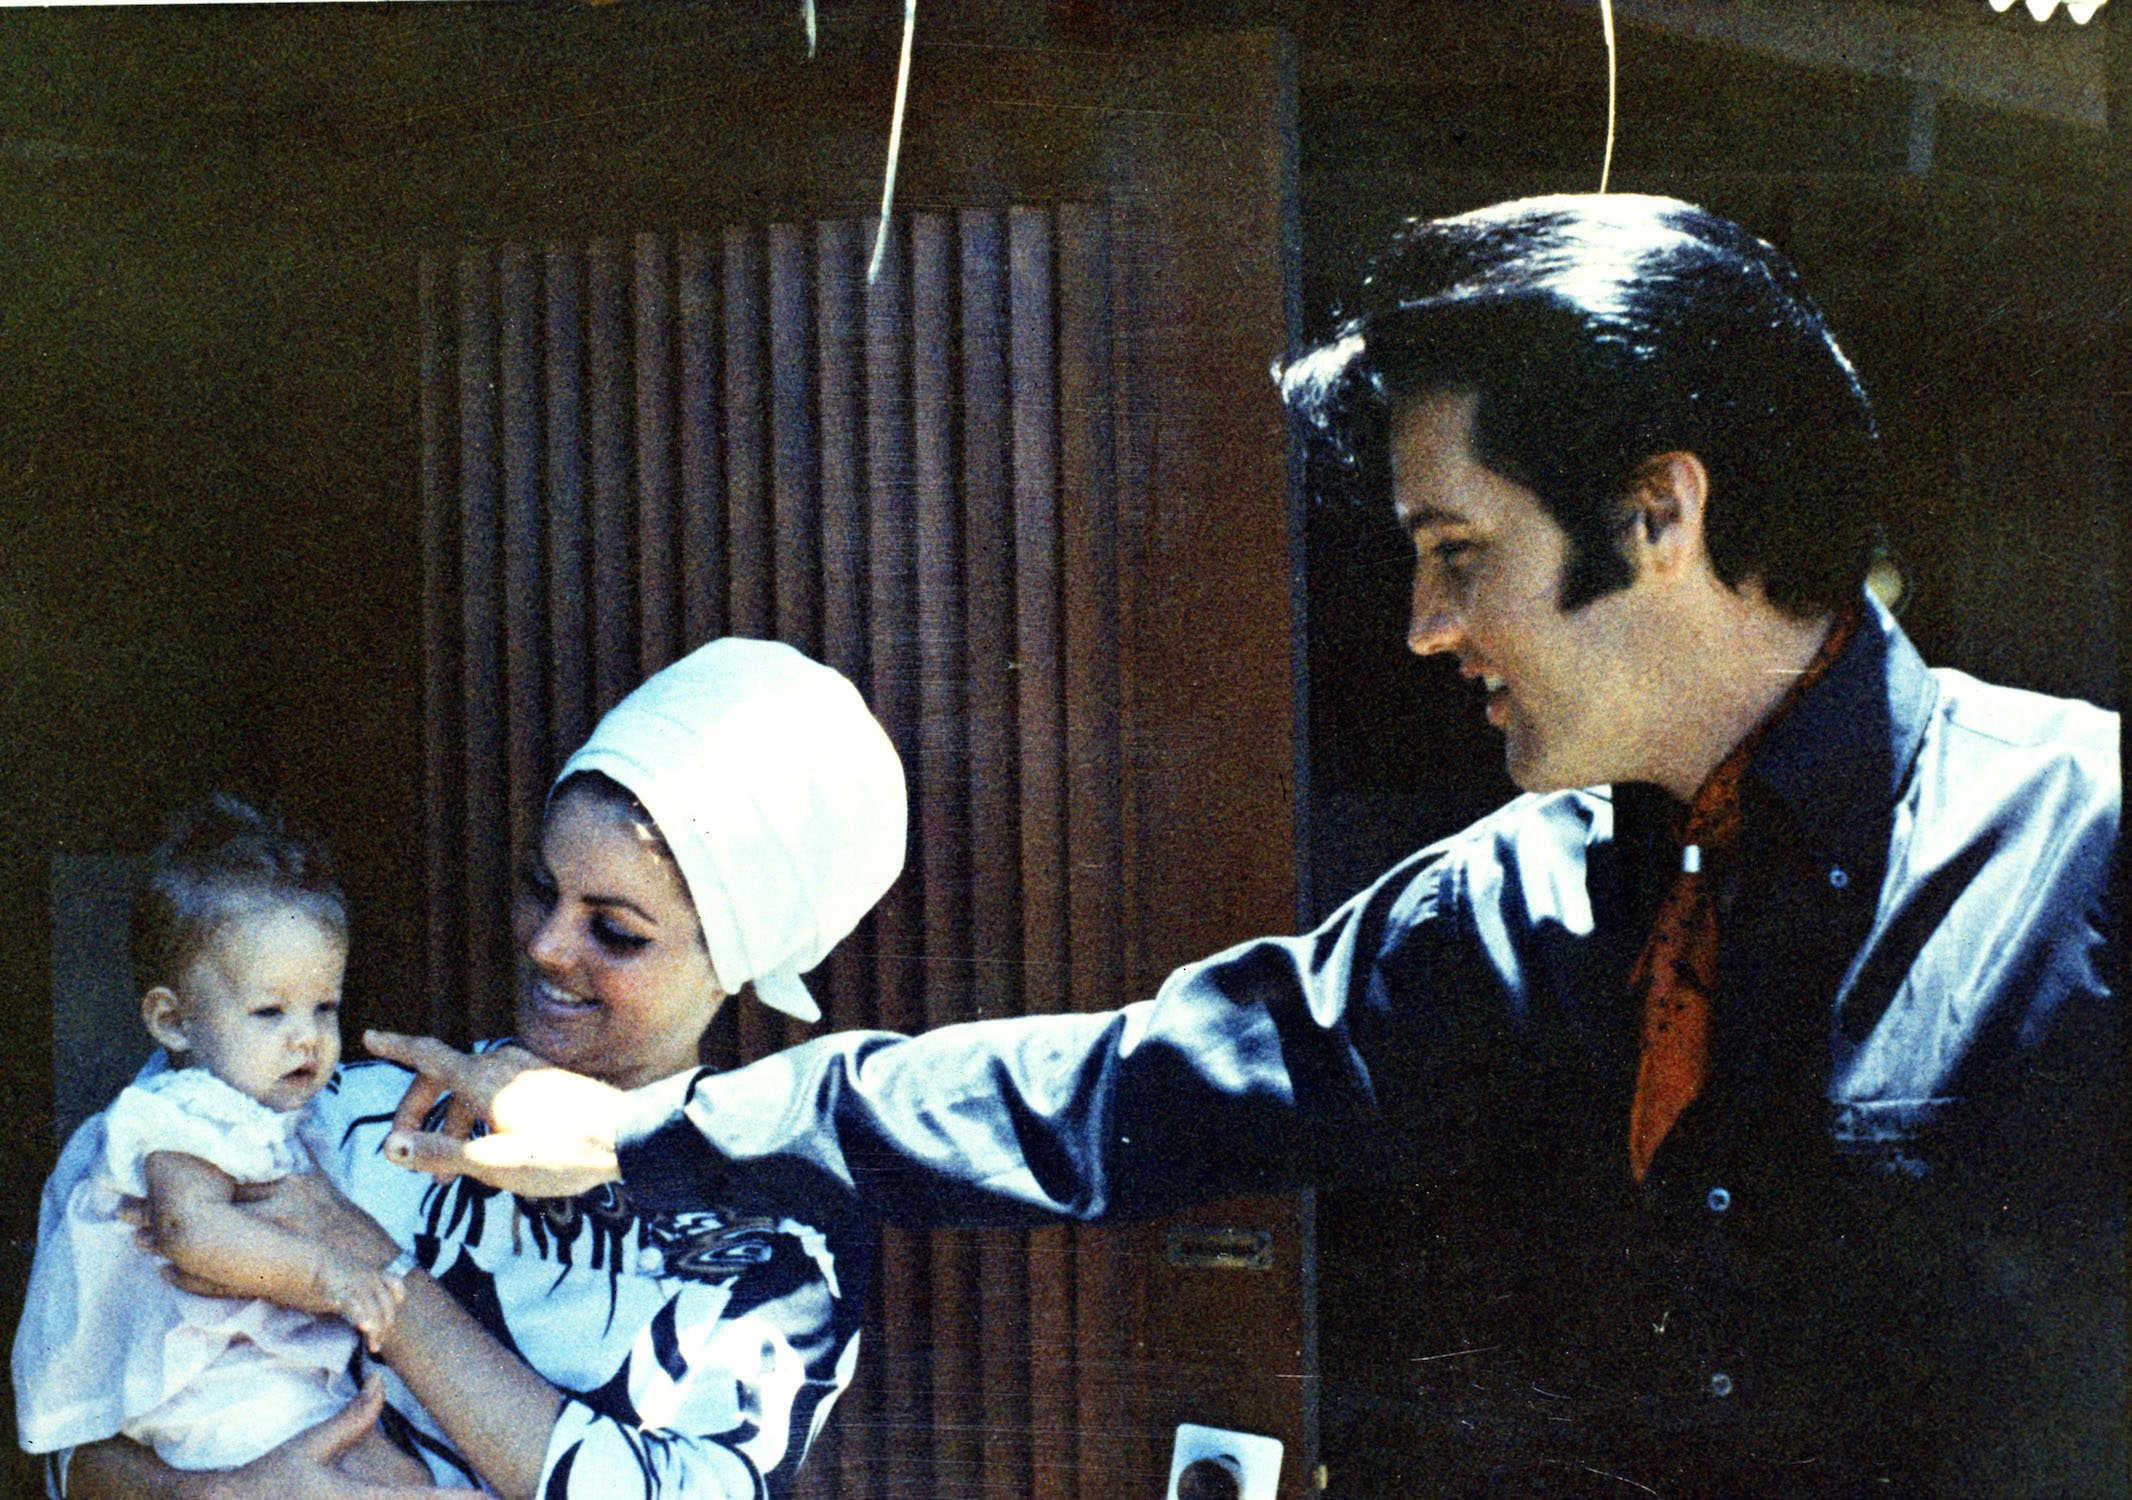 Priscilla Presley holding baby Lisa Marie Presley while Elvis Presley points at the child